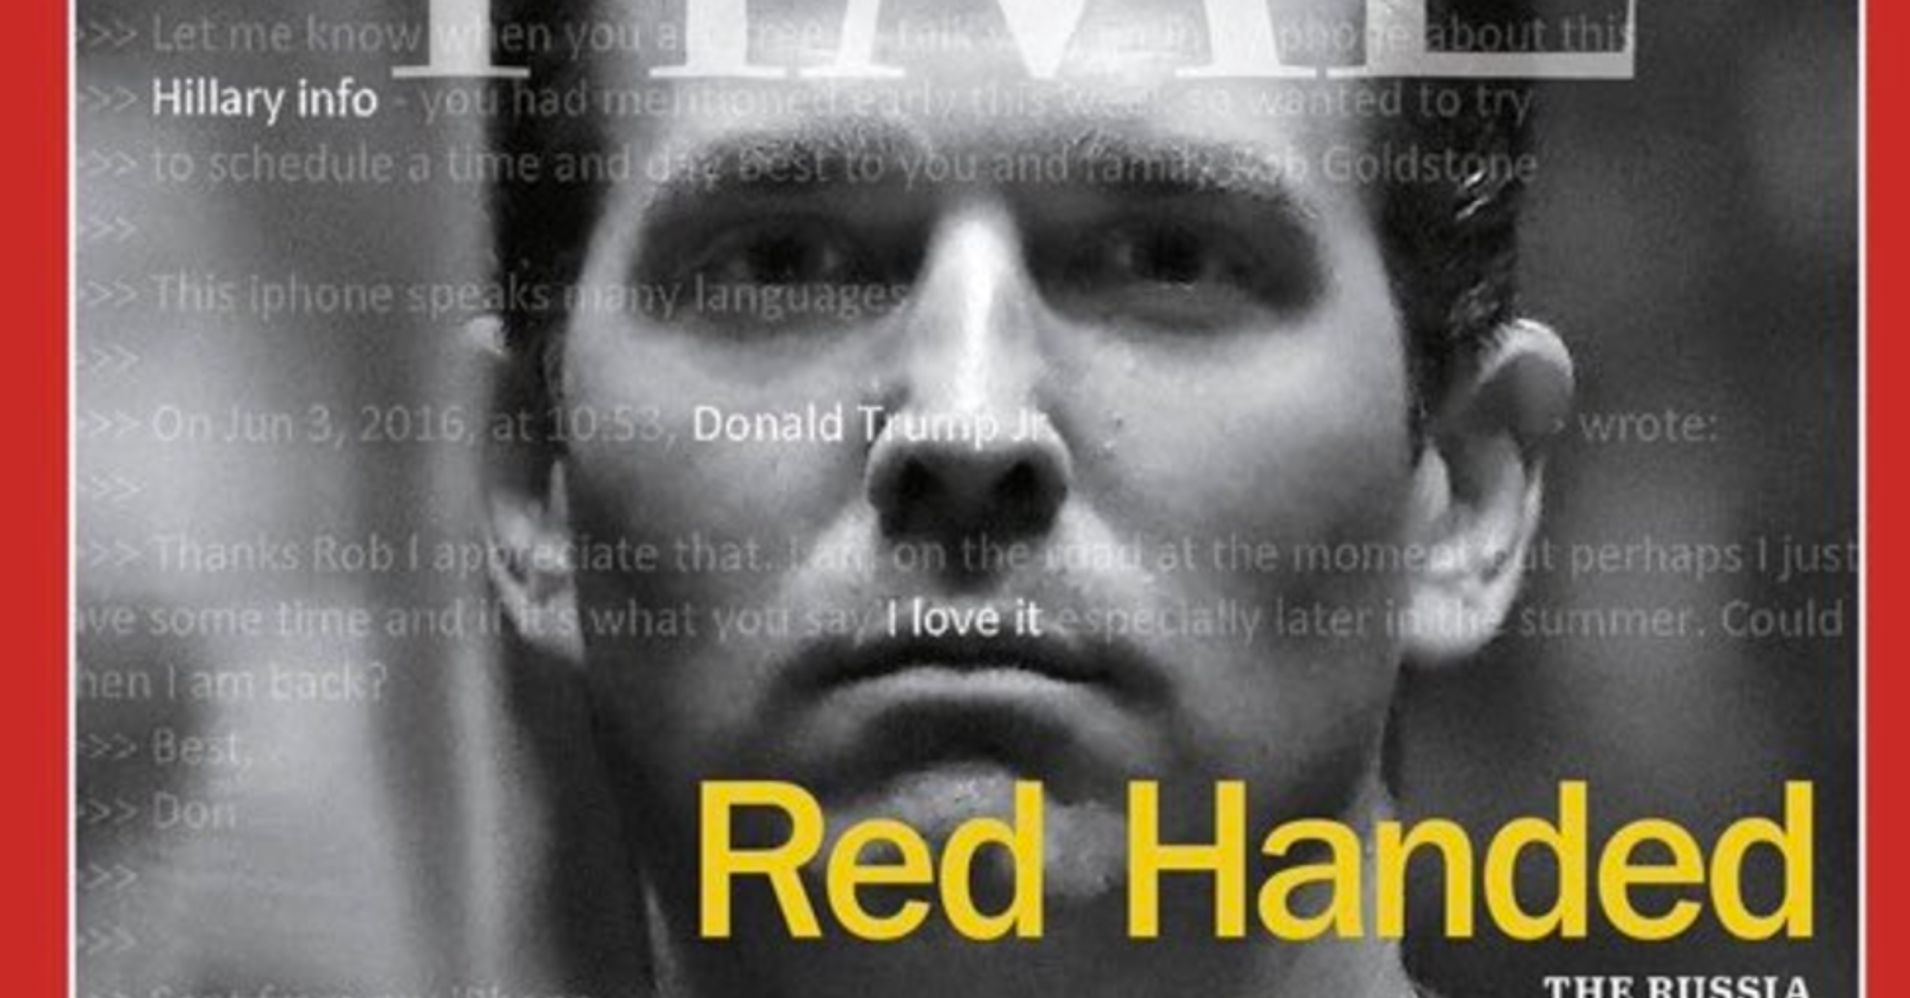 Time Magazine Puts 'Red Handed' Donald Trump Jr. On Cover | HuffPost